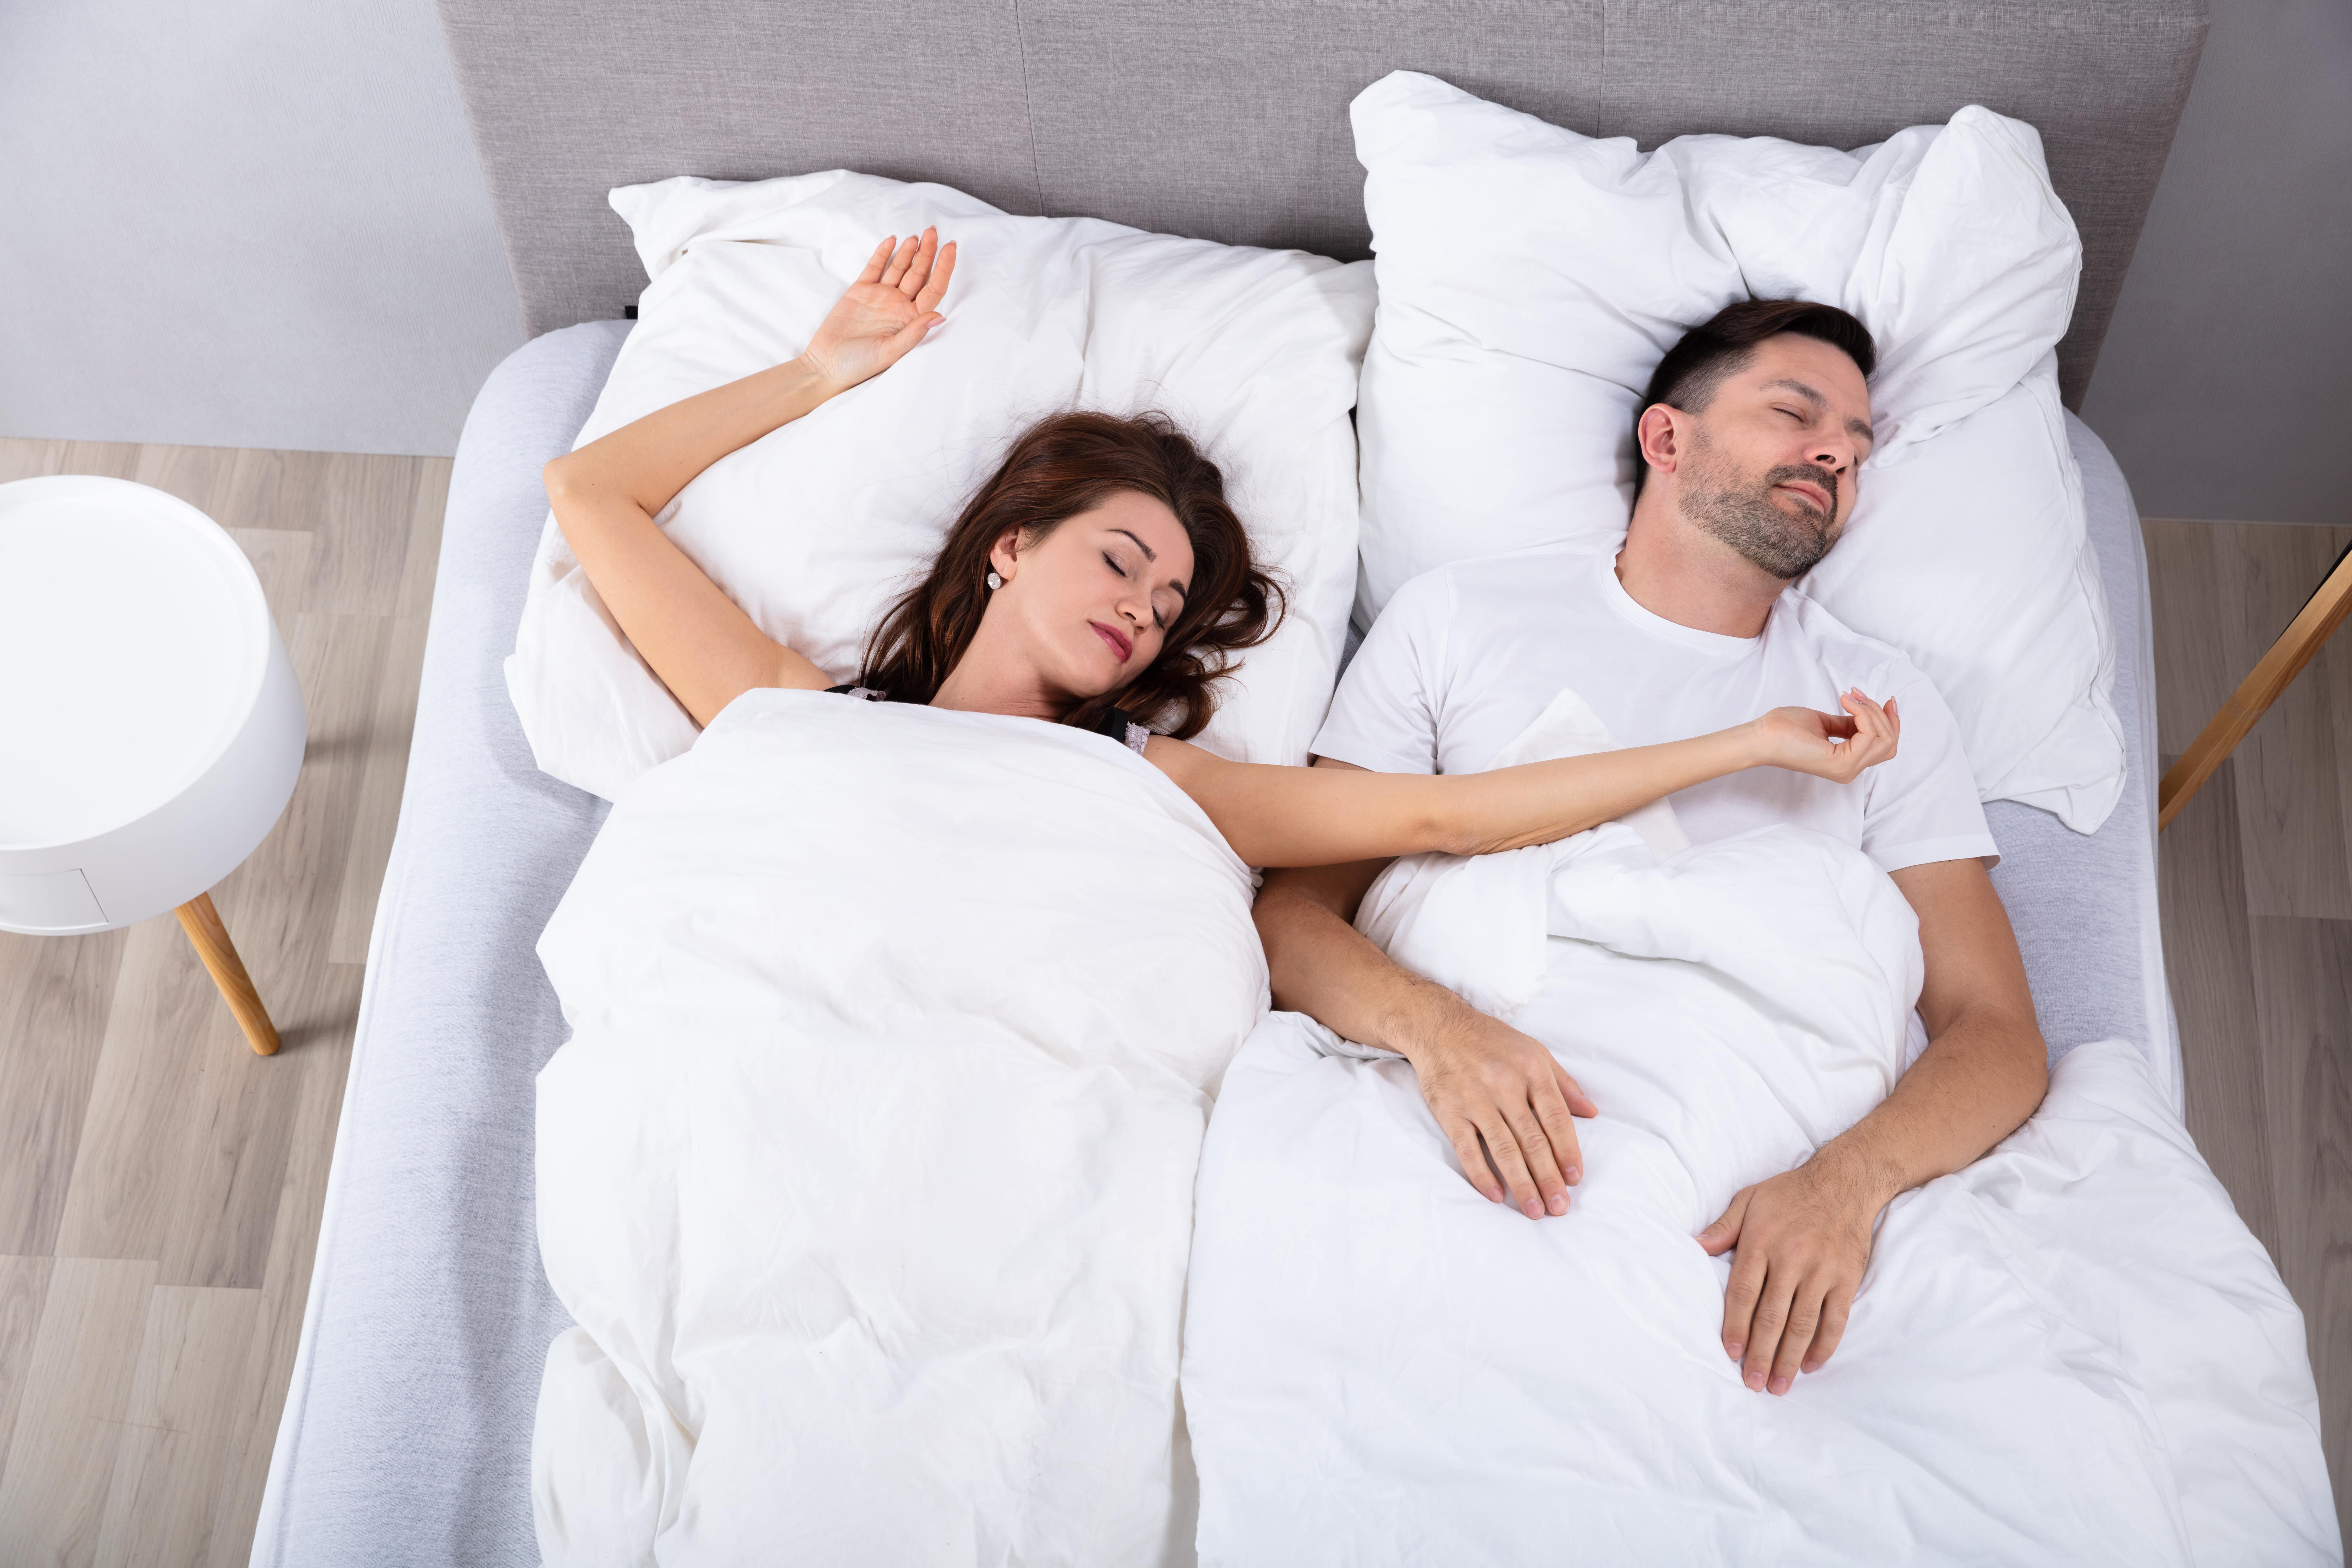 Bird's eye view of a man and woman in bed asleep. Woman has her arm flopped across the man's chest.